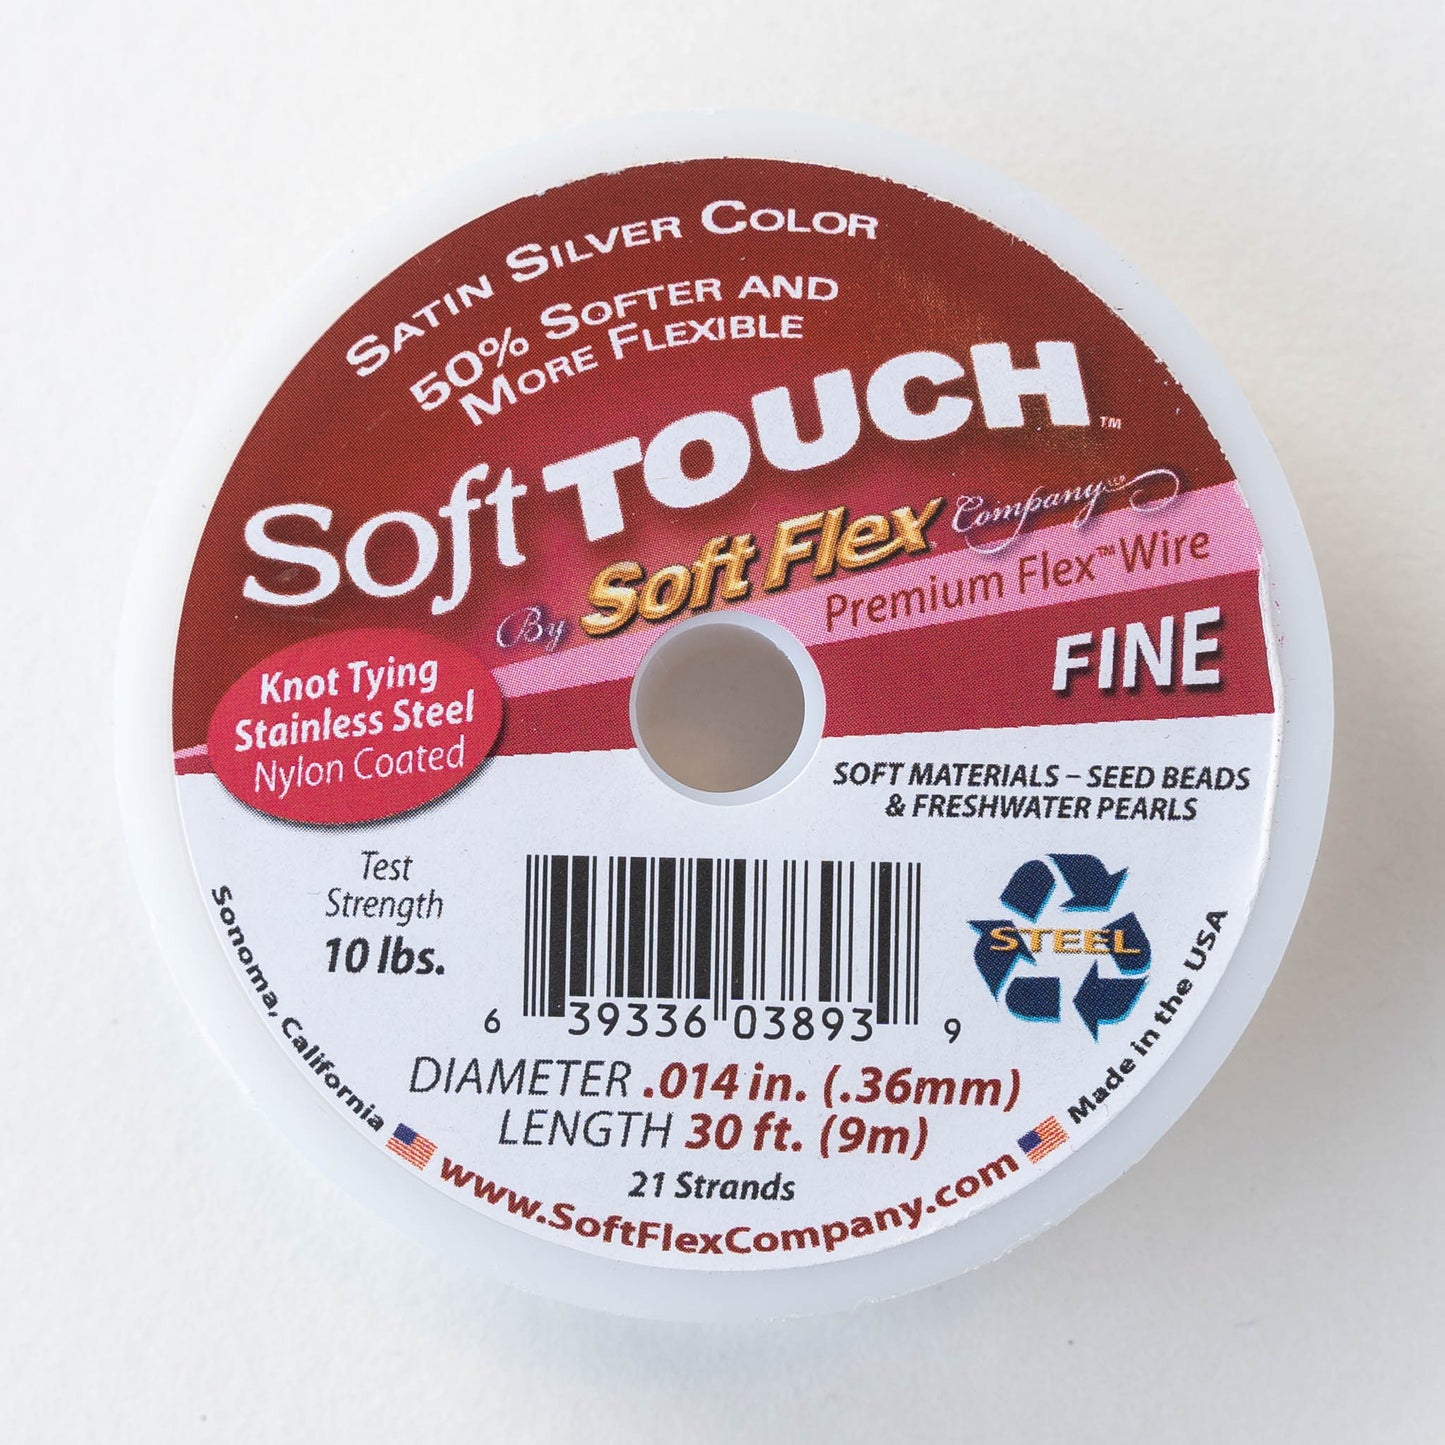 Load image into Gallery viewer, Soft Flex Beading Wire - .014 - Fine - Satin Silver Color - 30 Feet
